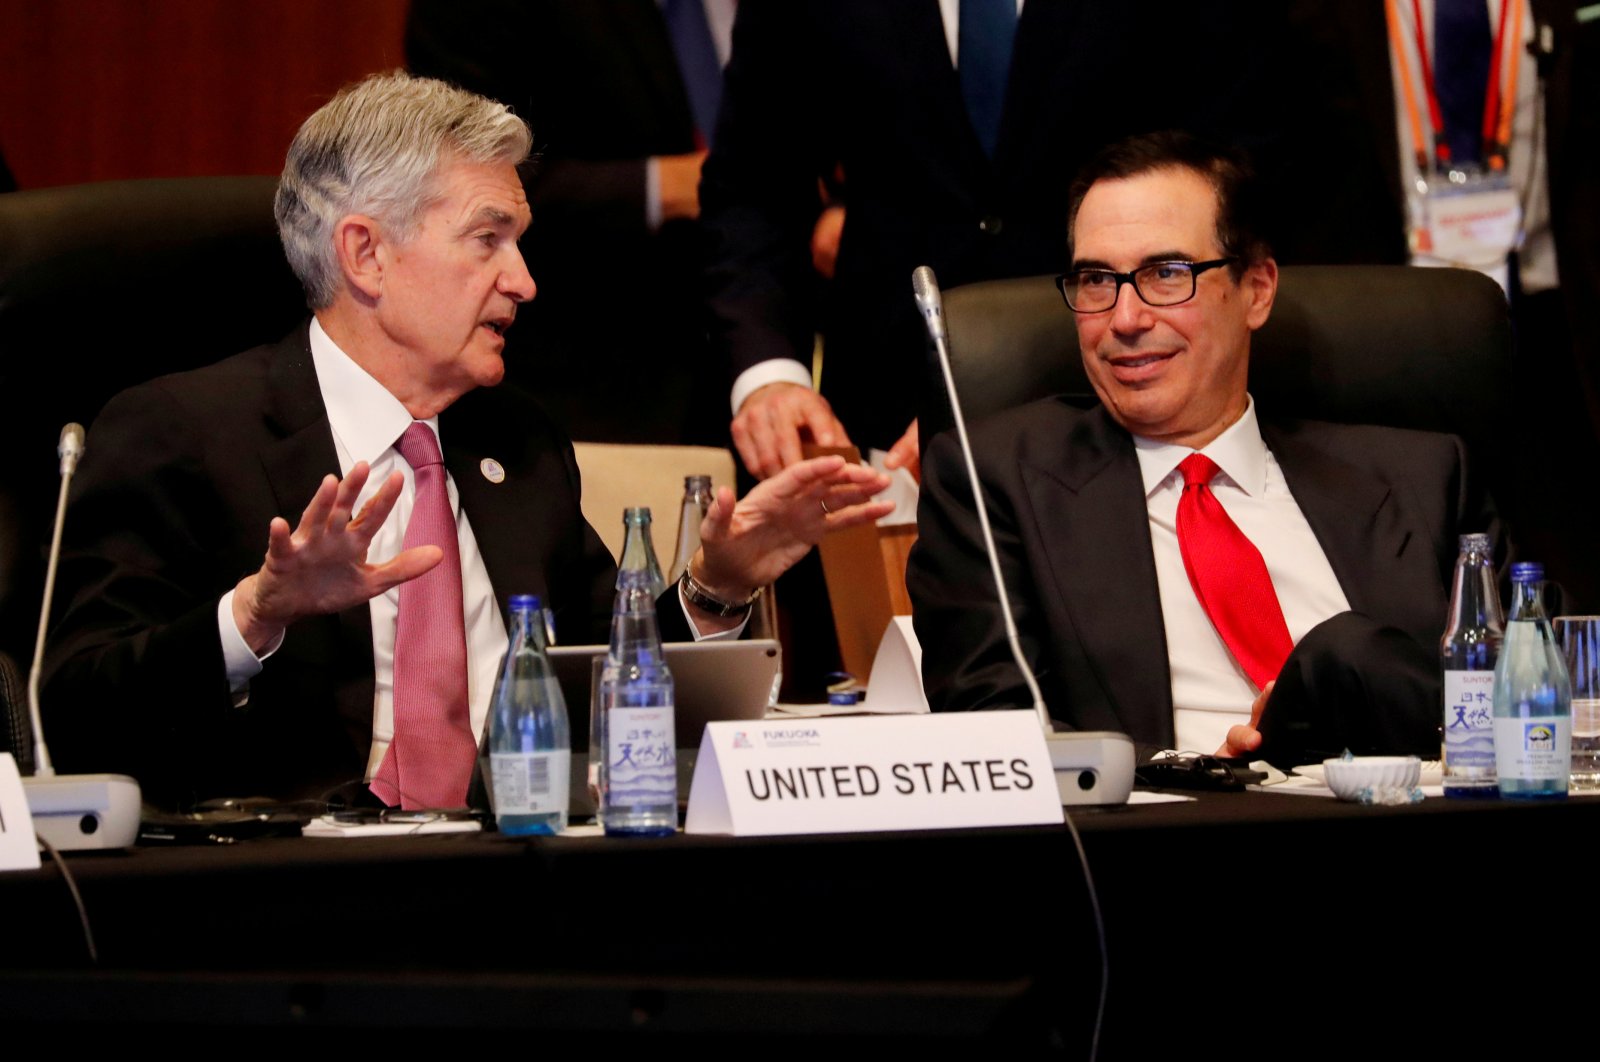 Federal Reserve Chairman Jerome Powell talks with U.S. Treasury Secretary Steven Mnuchin during the G-20 finance ministers and central bank governors meeting in Fukuoka, Japan June 8, 2019. (REUTERS Photo)